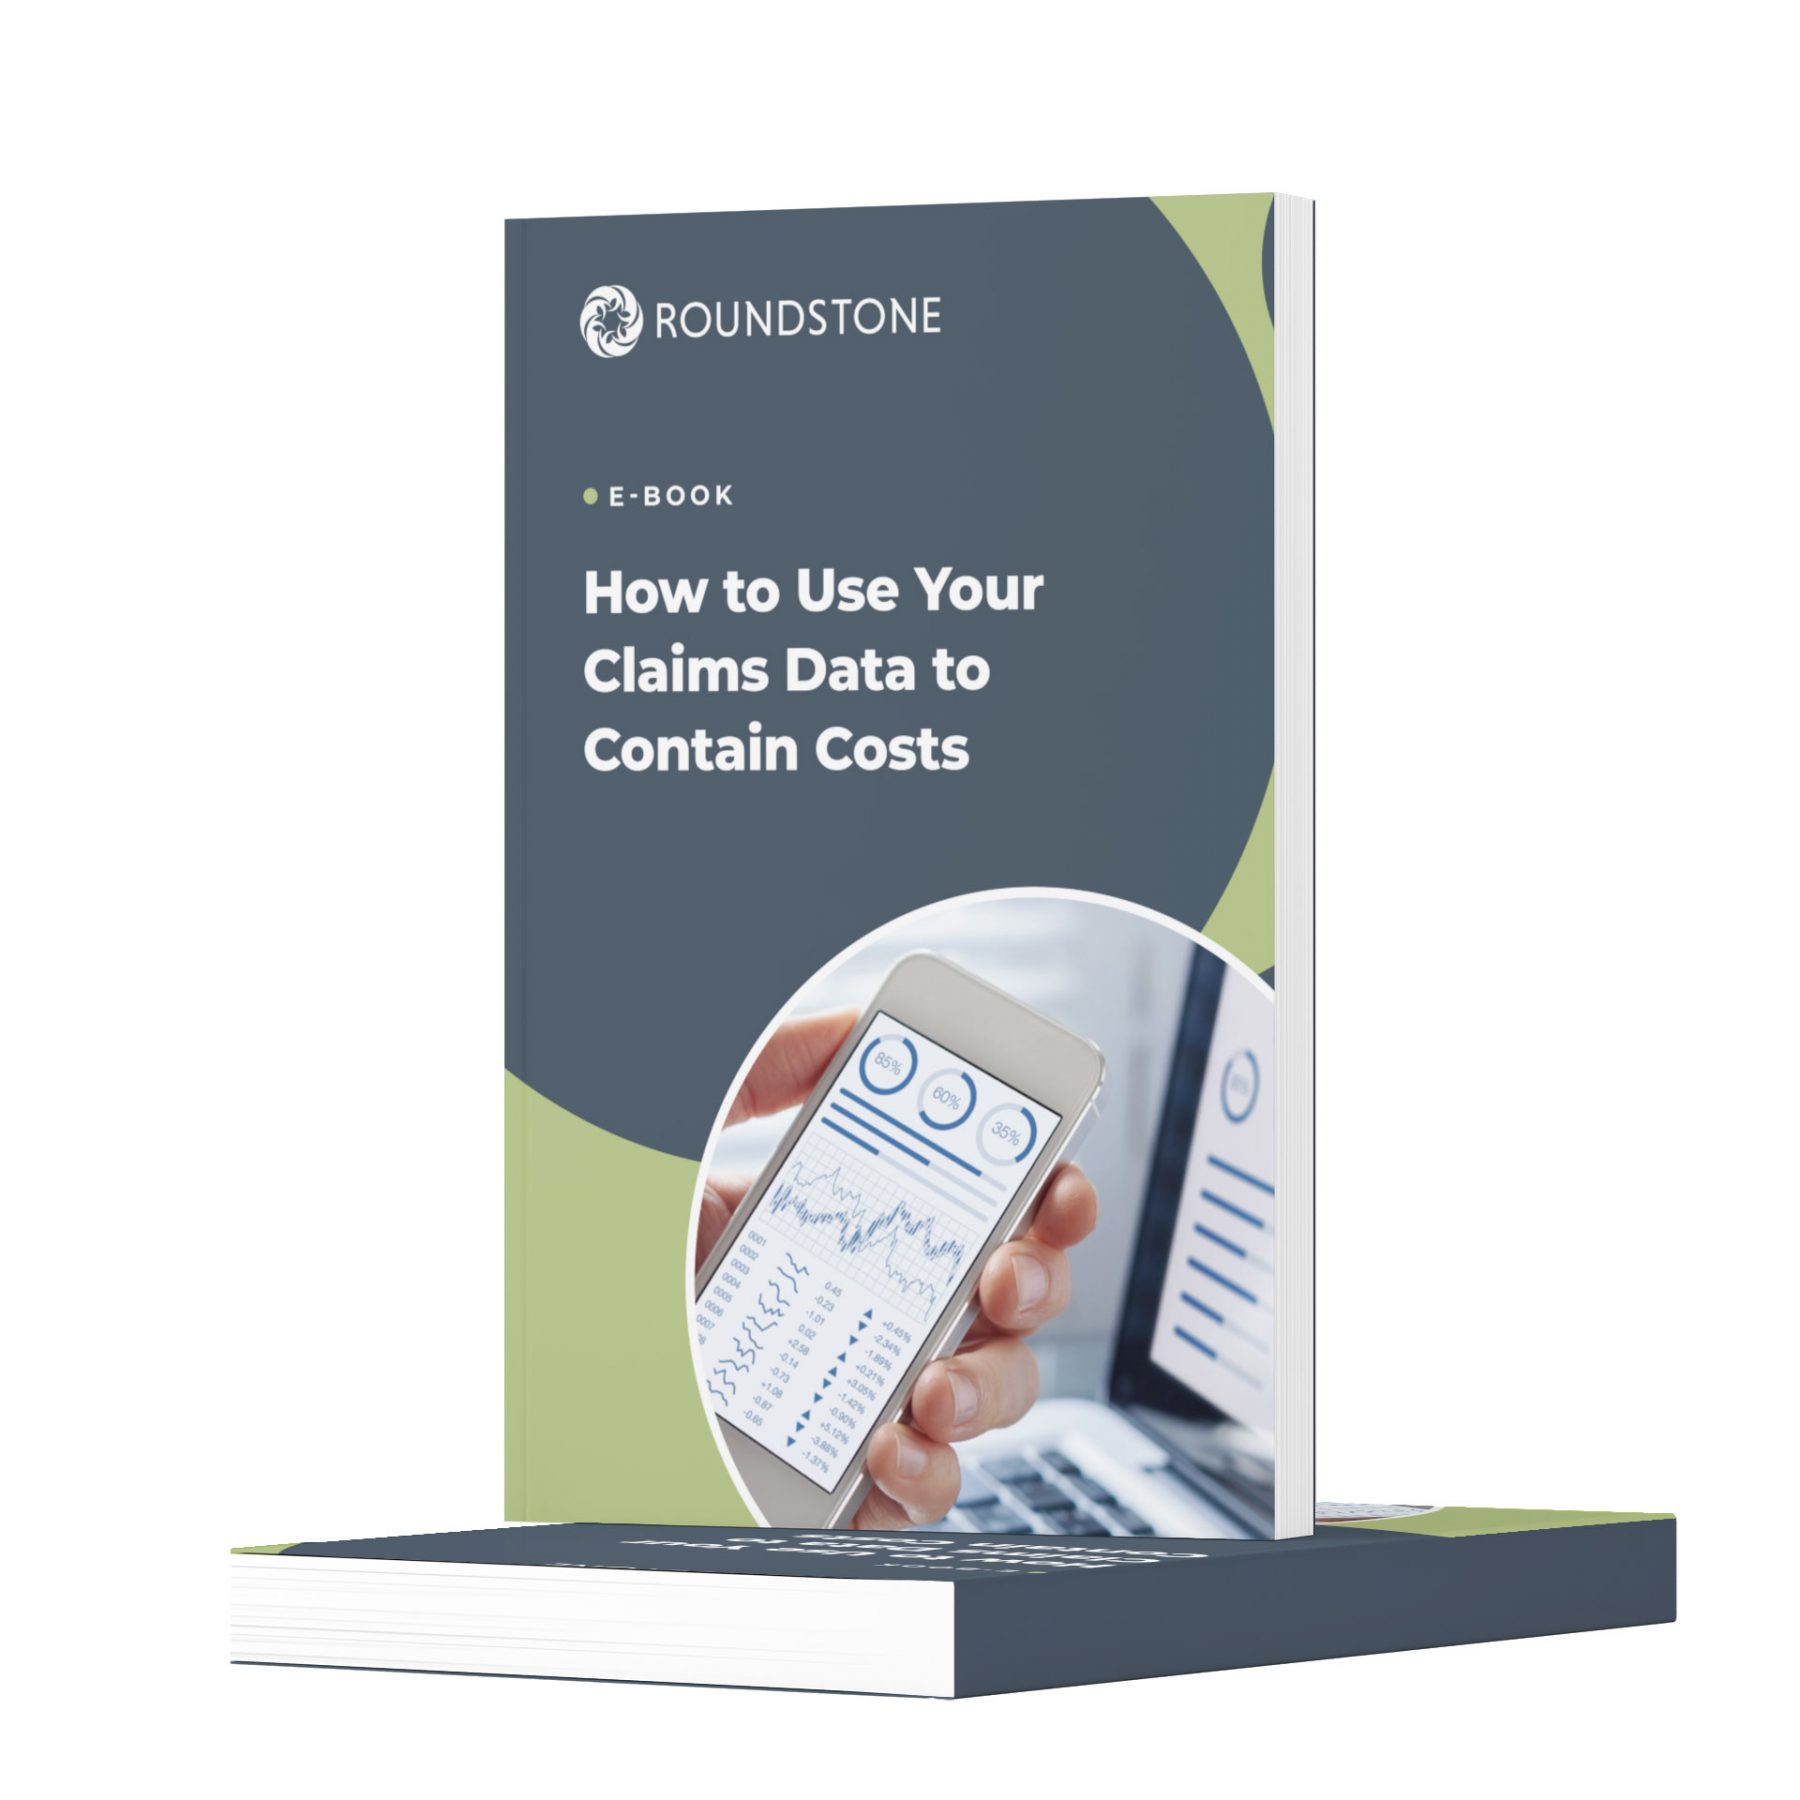 How-to-Use-Your-Claims-Data-to-Contain-Costs-eBook-Mockup